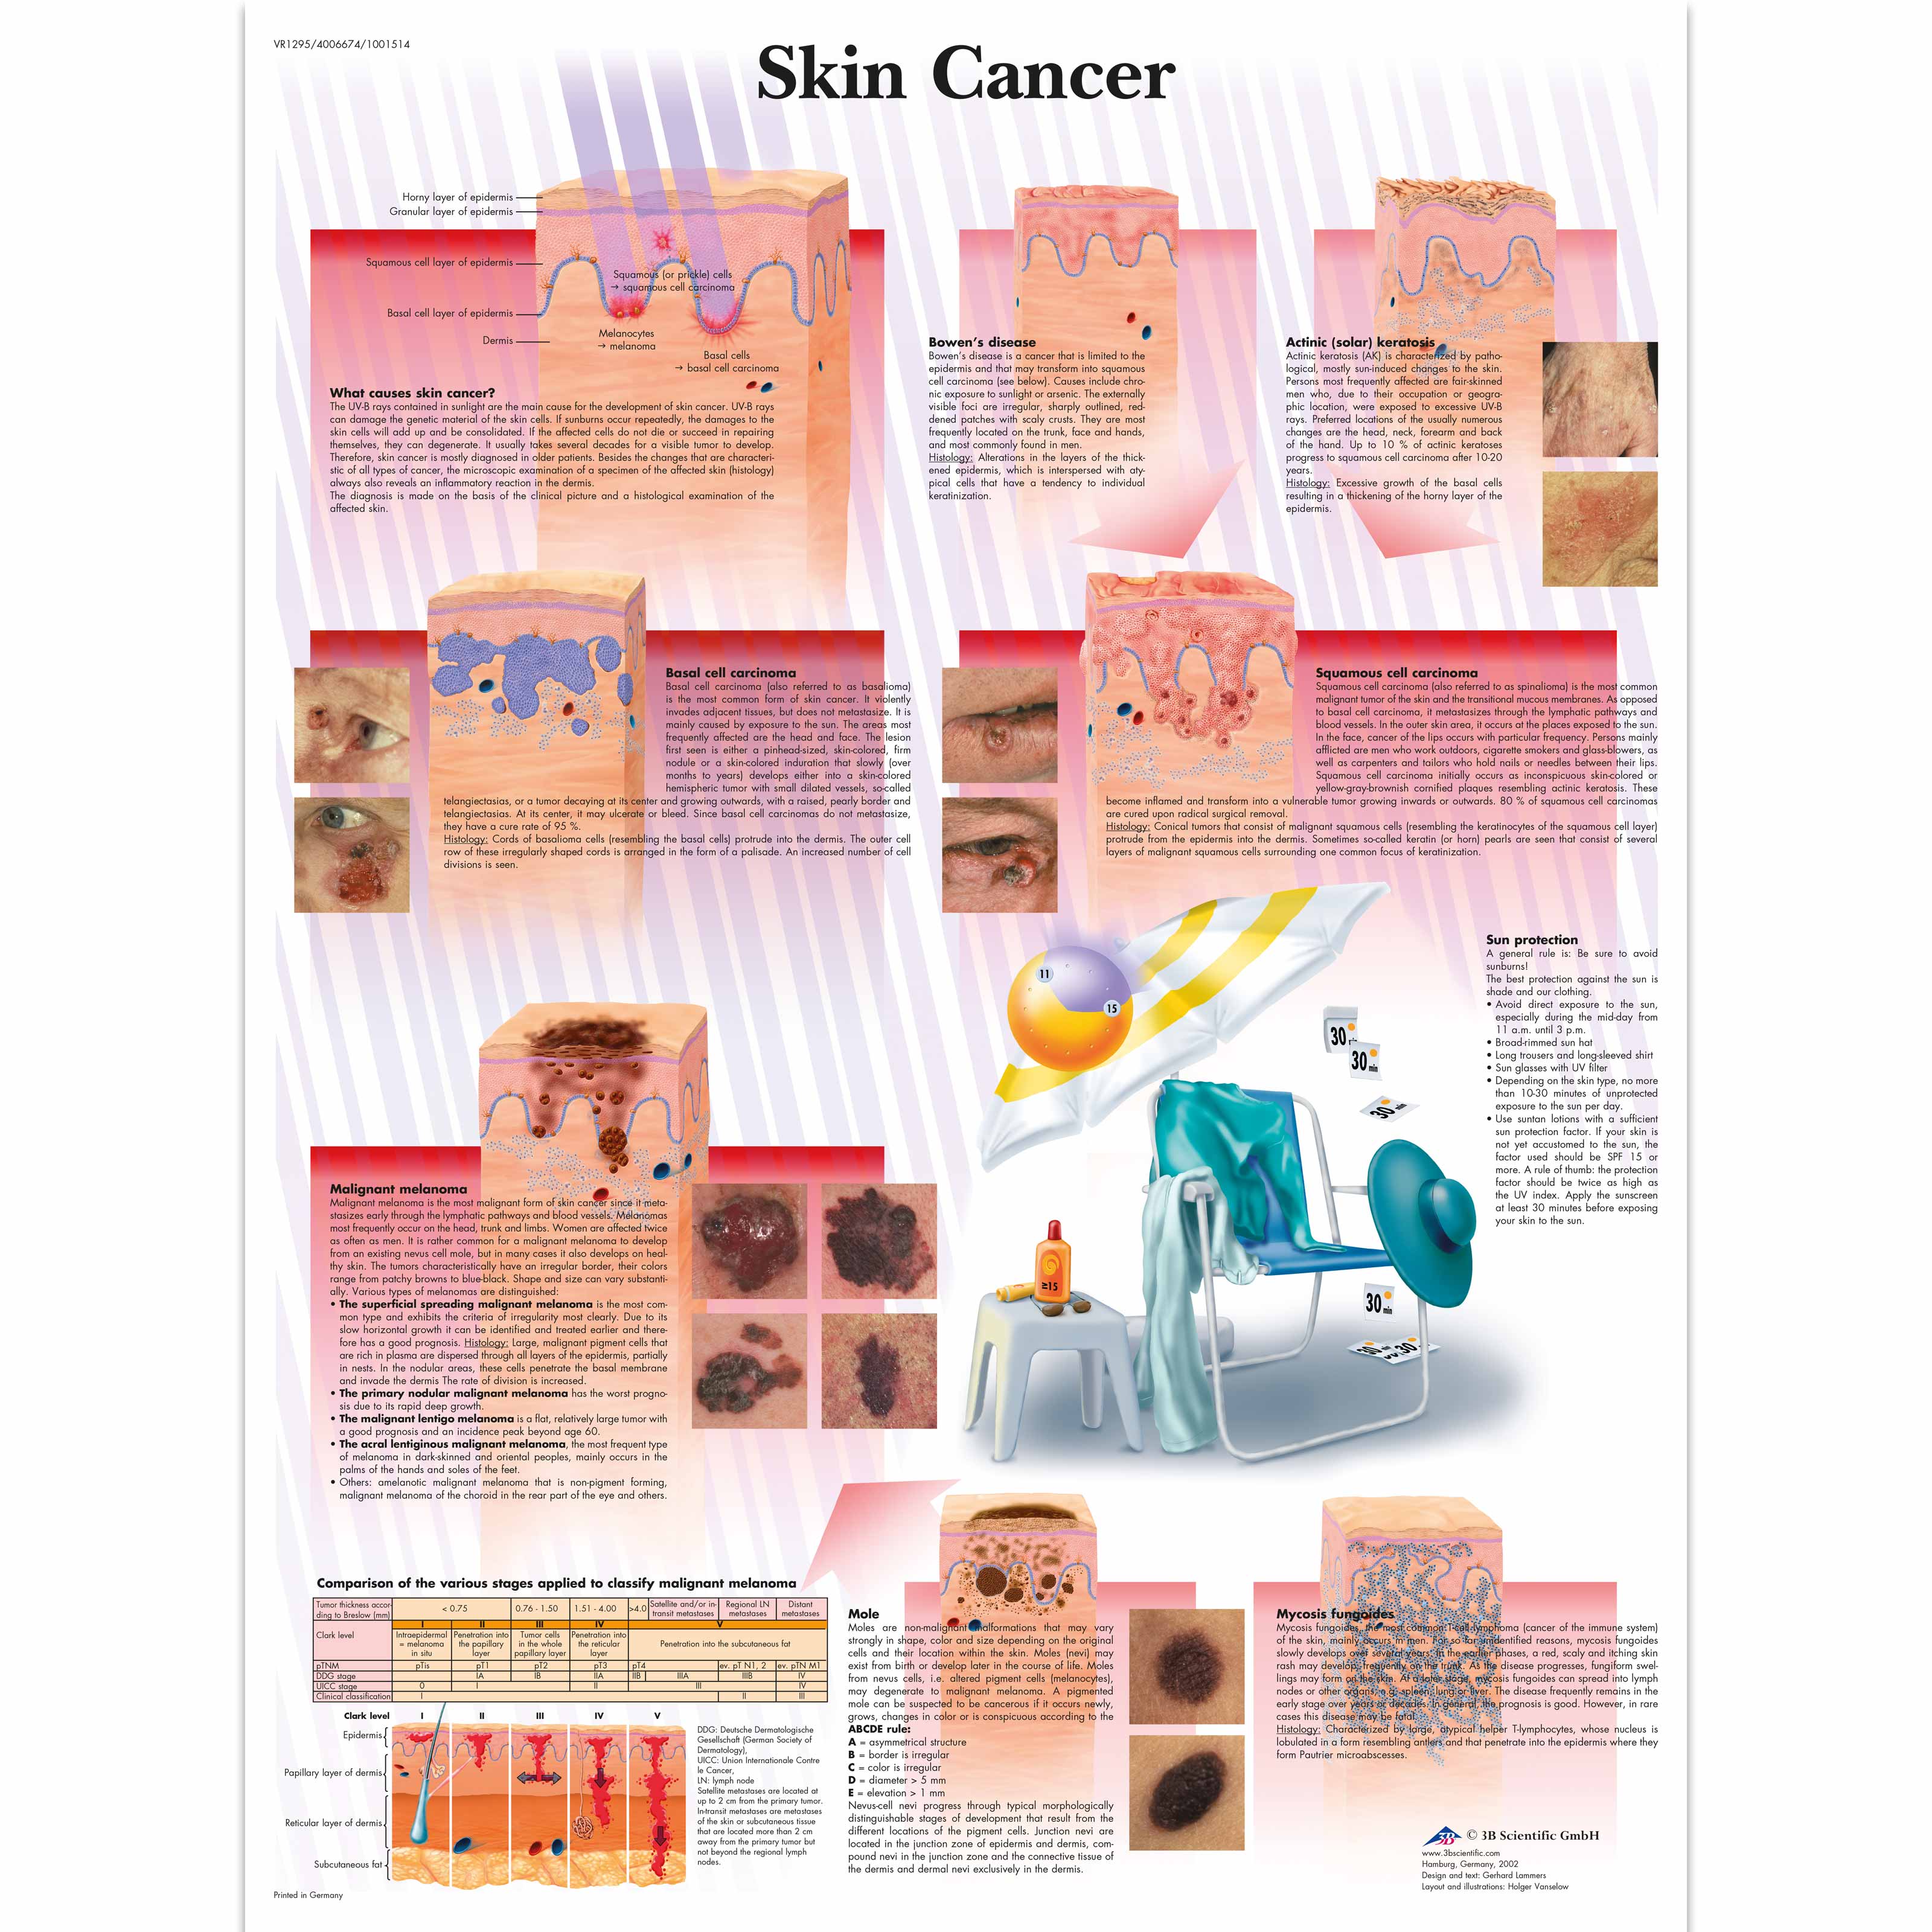 Skin Cancer Chart Pictures: A Visual Reference of Charts | Chart Master